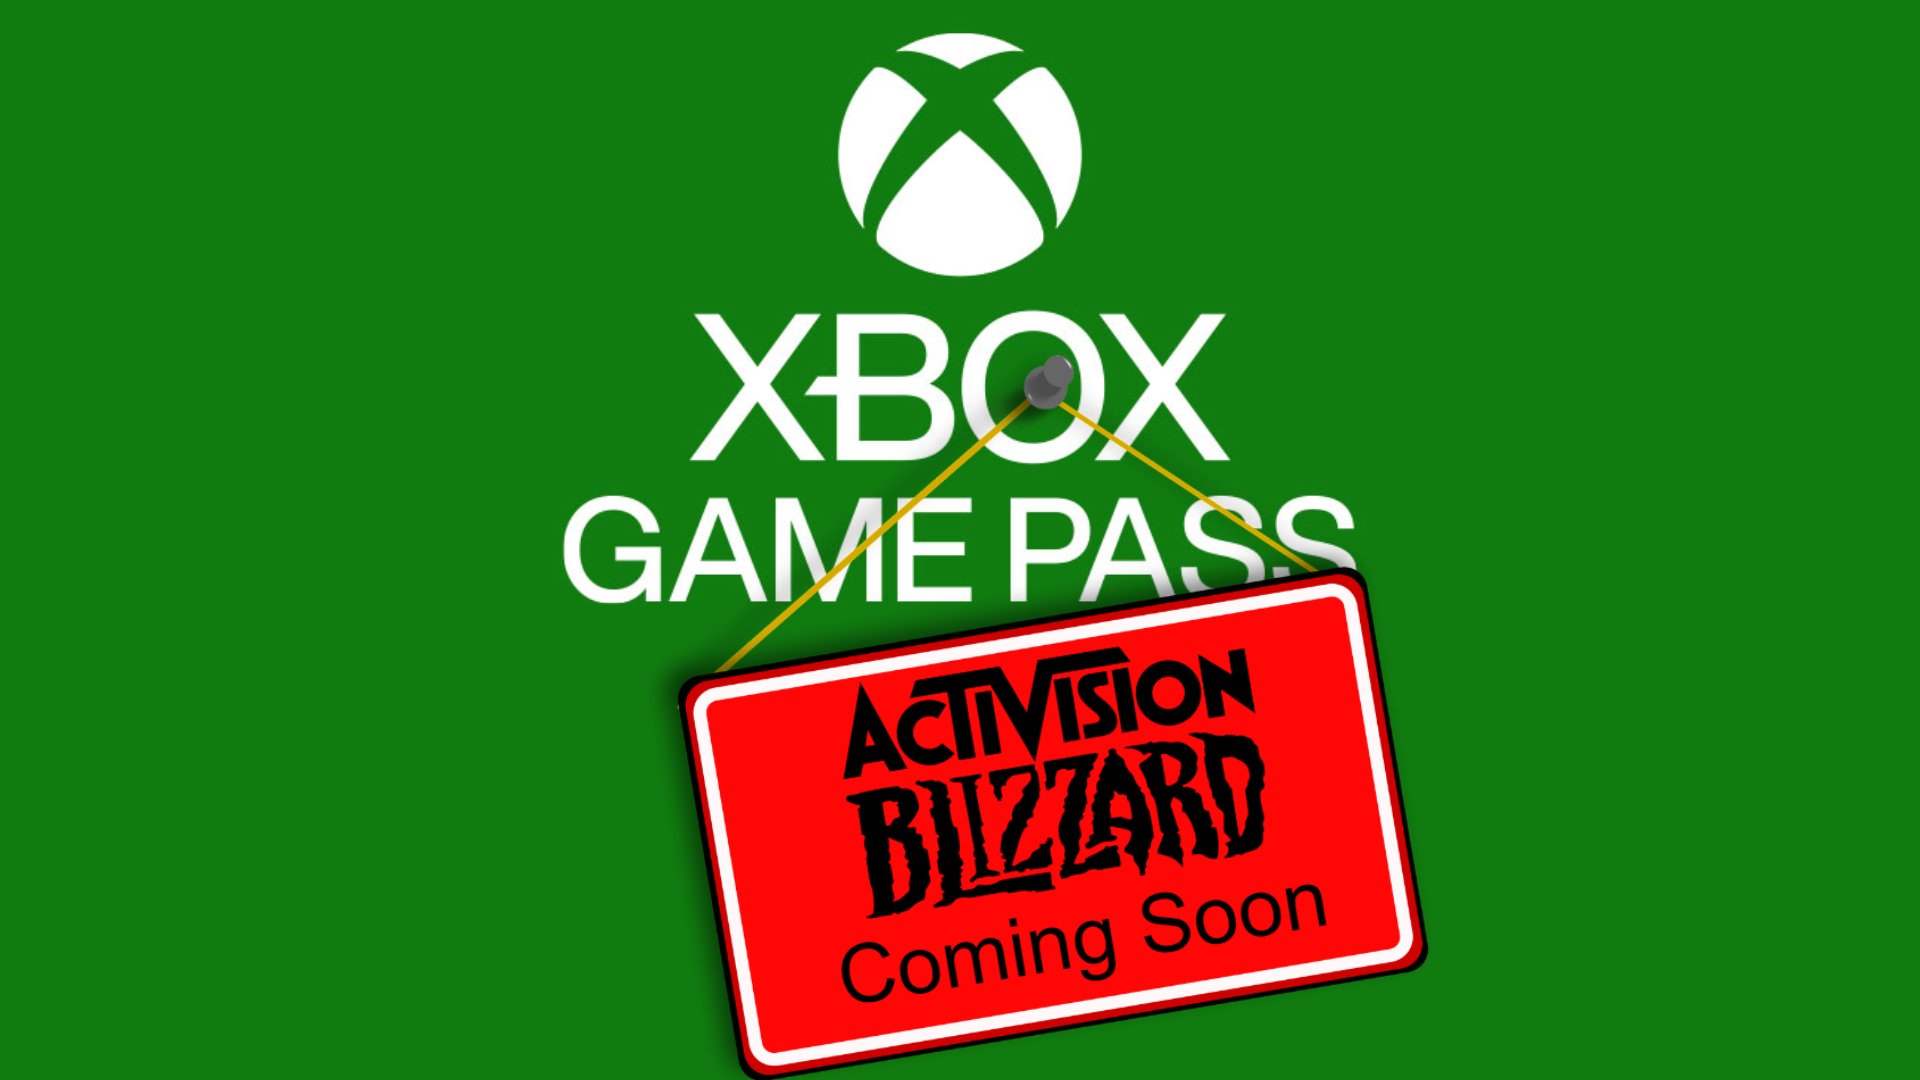 Activision Games Reportedly Coming to Xbox Game Pass Soon